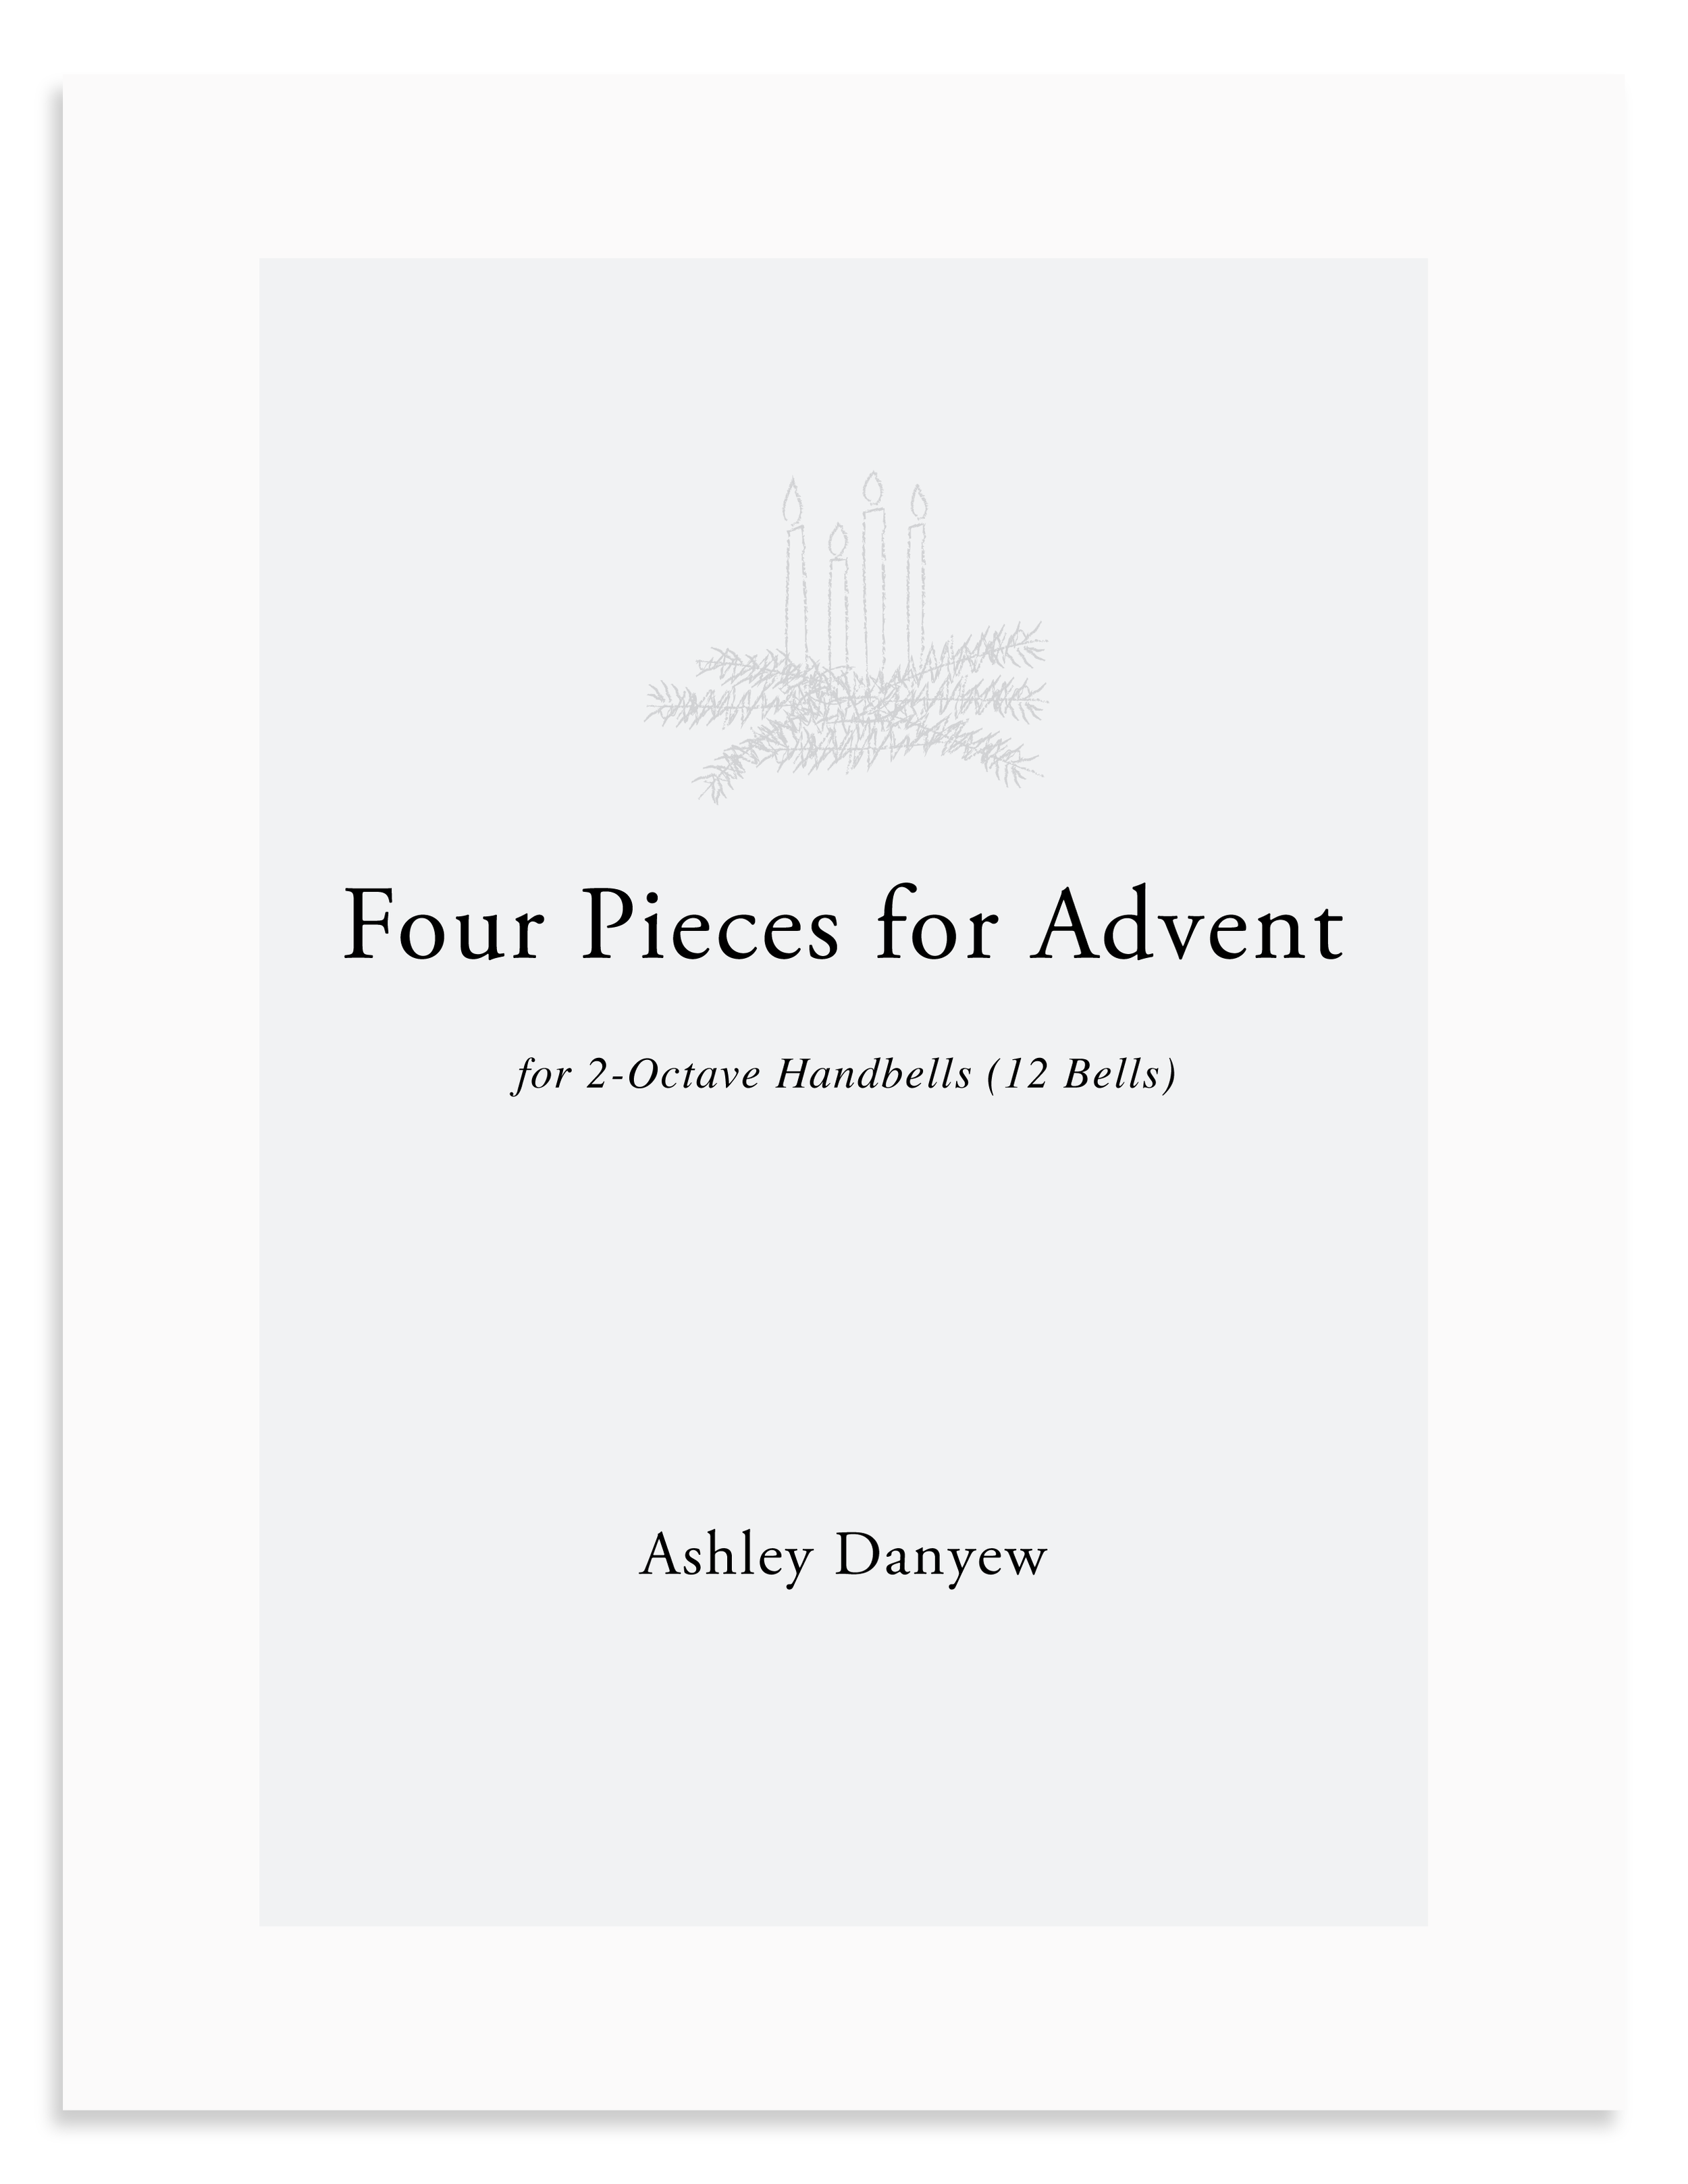 Four Pieces for Advent: A New Collection for 2-Octave Handbells (12 bells)